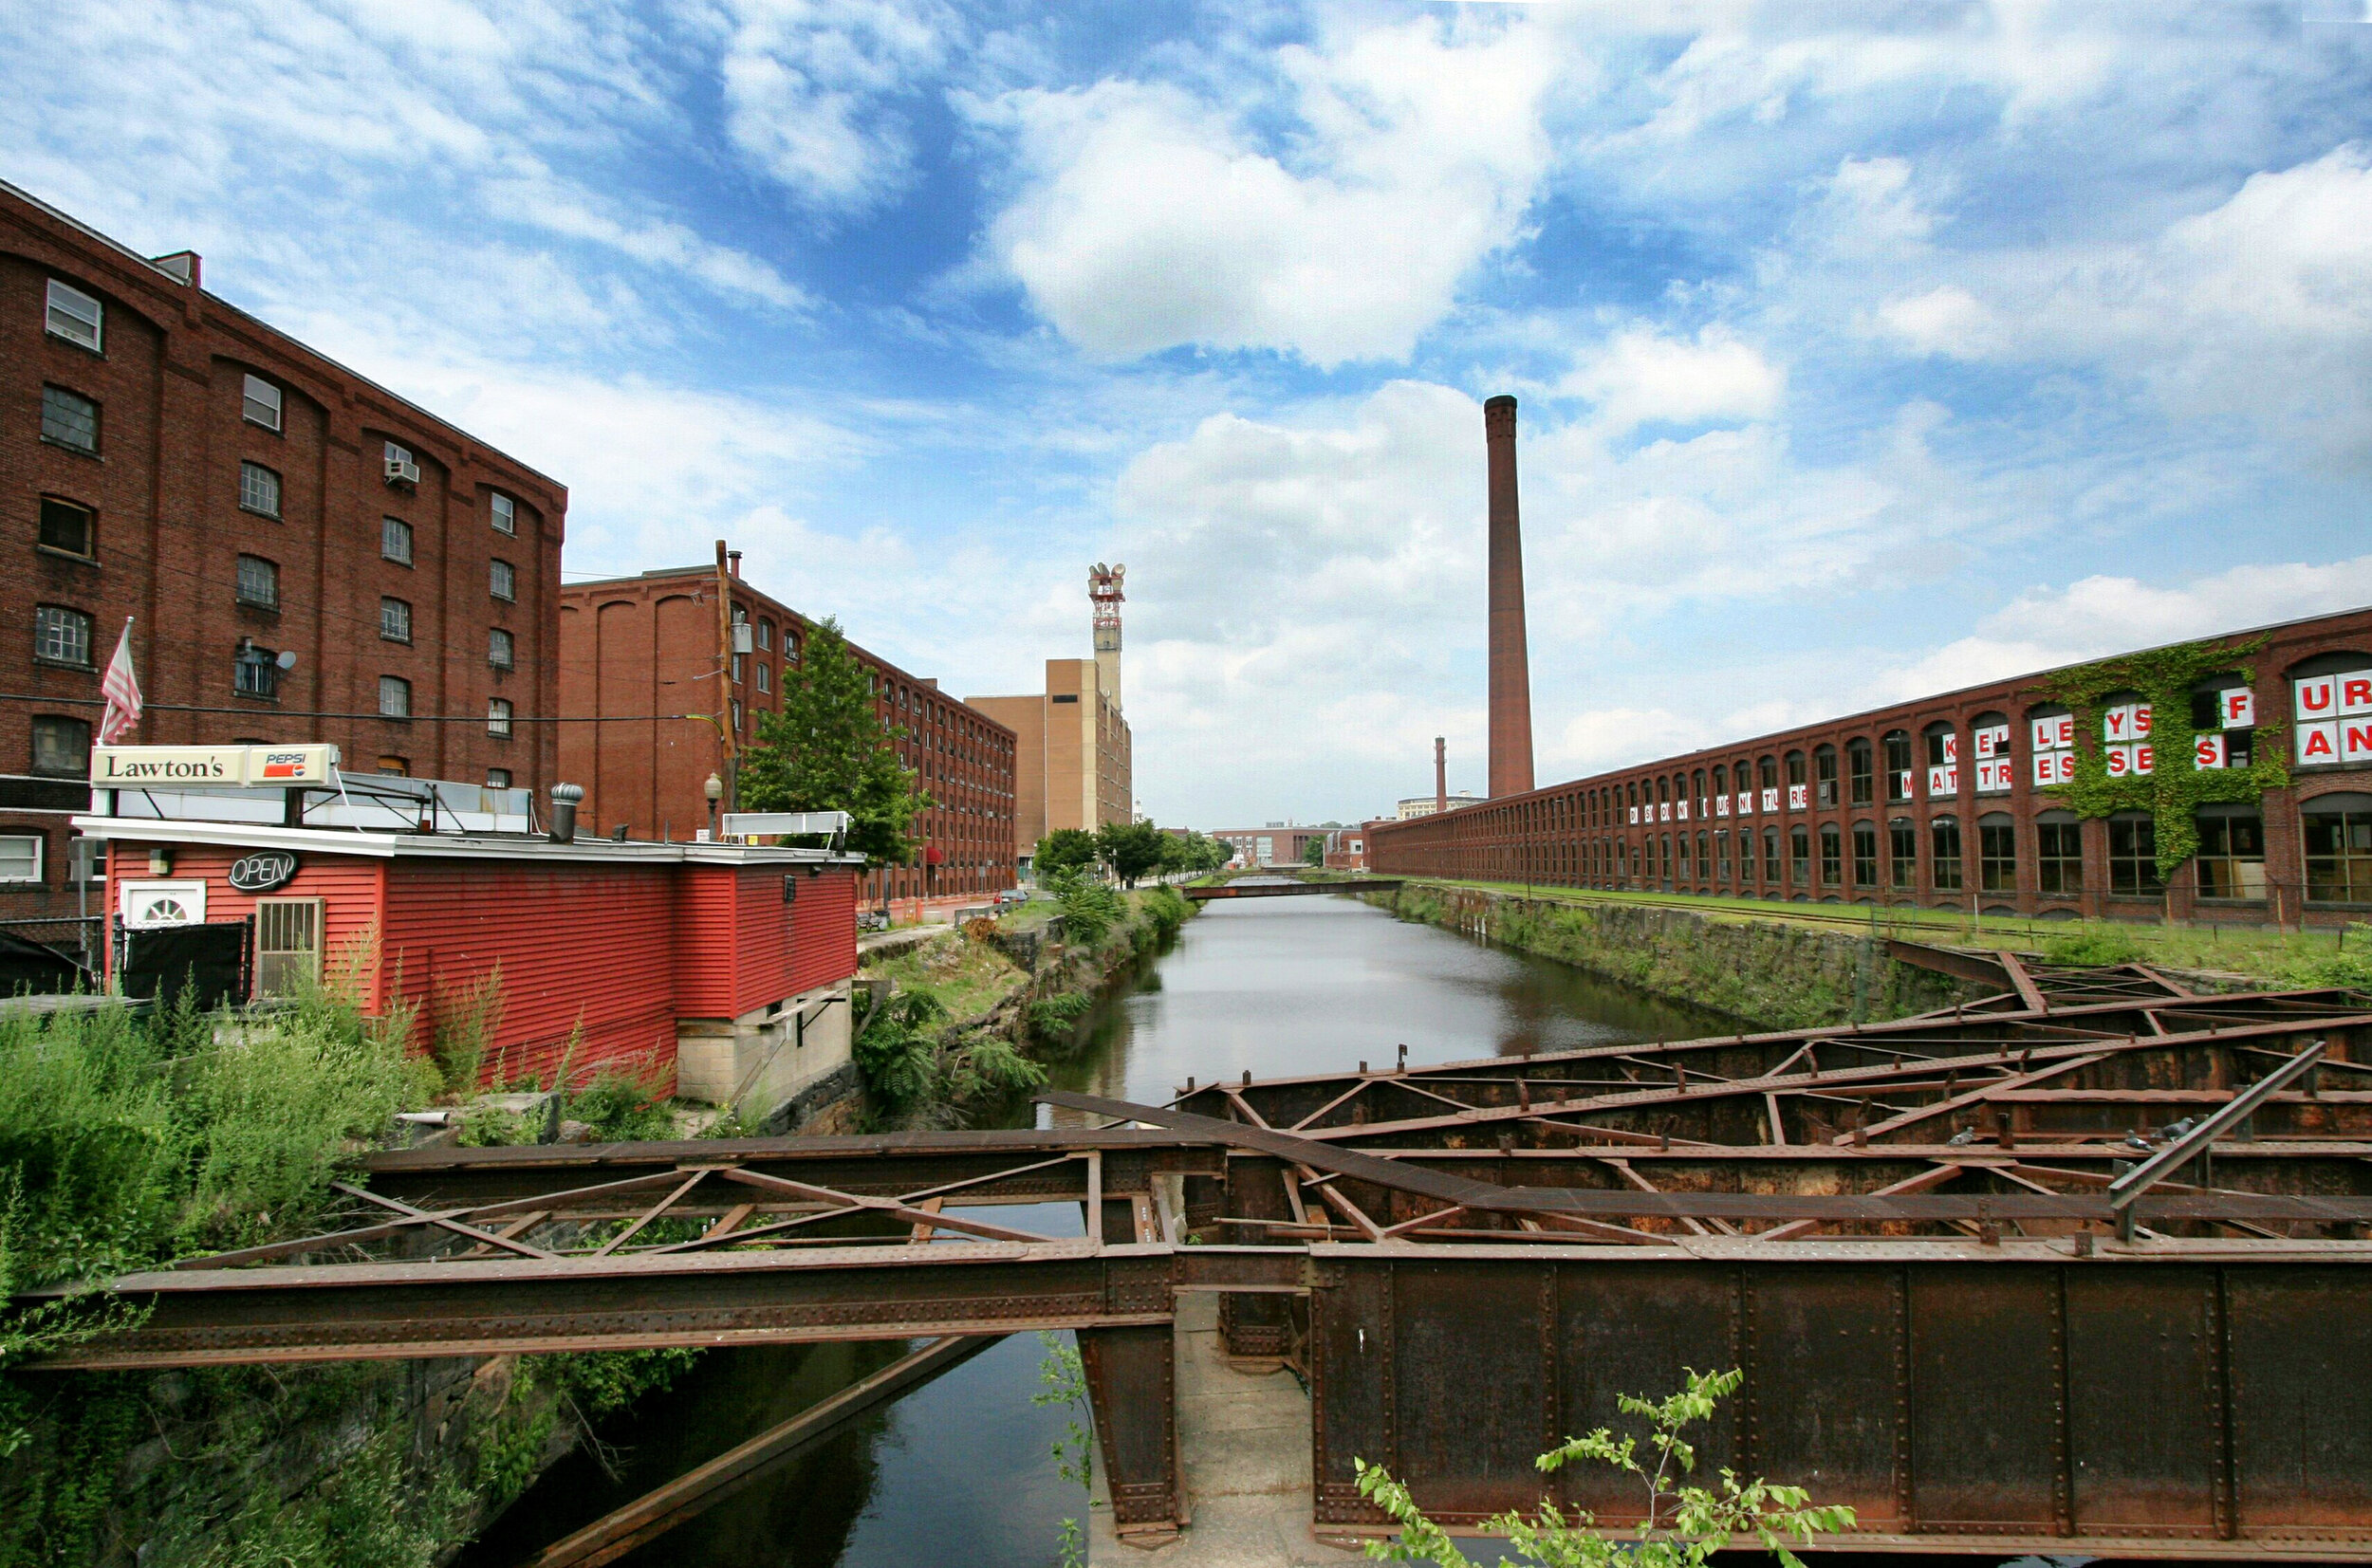 Lawton's and canal-edit.jpg